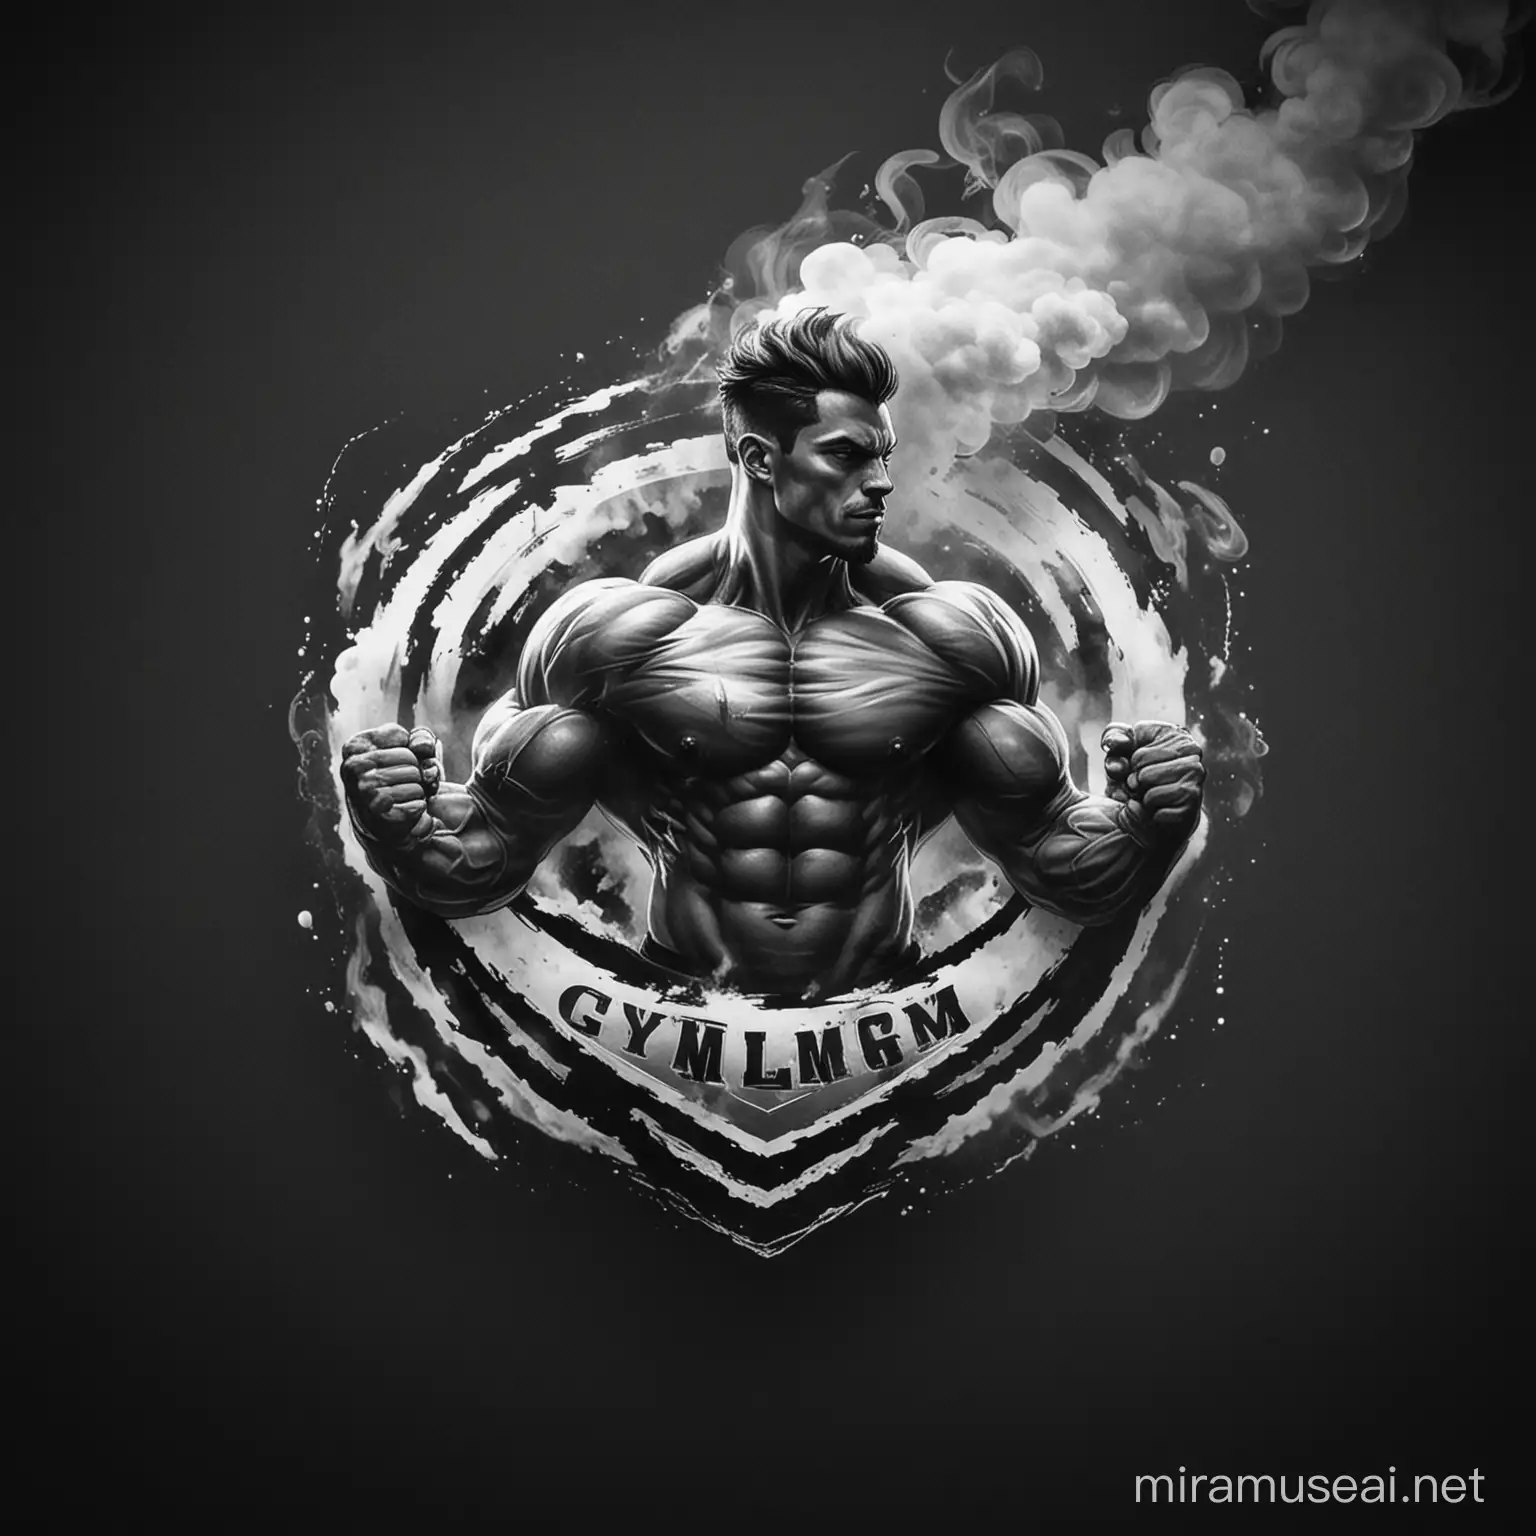 Create a logo using colors of black and white. Make the logo resembling gym work. The business is about creating gym programs for people to purchase. Create a cool effect on the gym logo and have smoke in the background as well. 